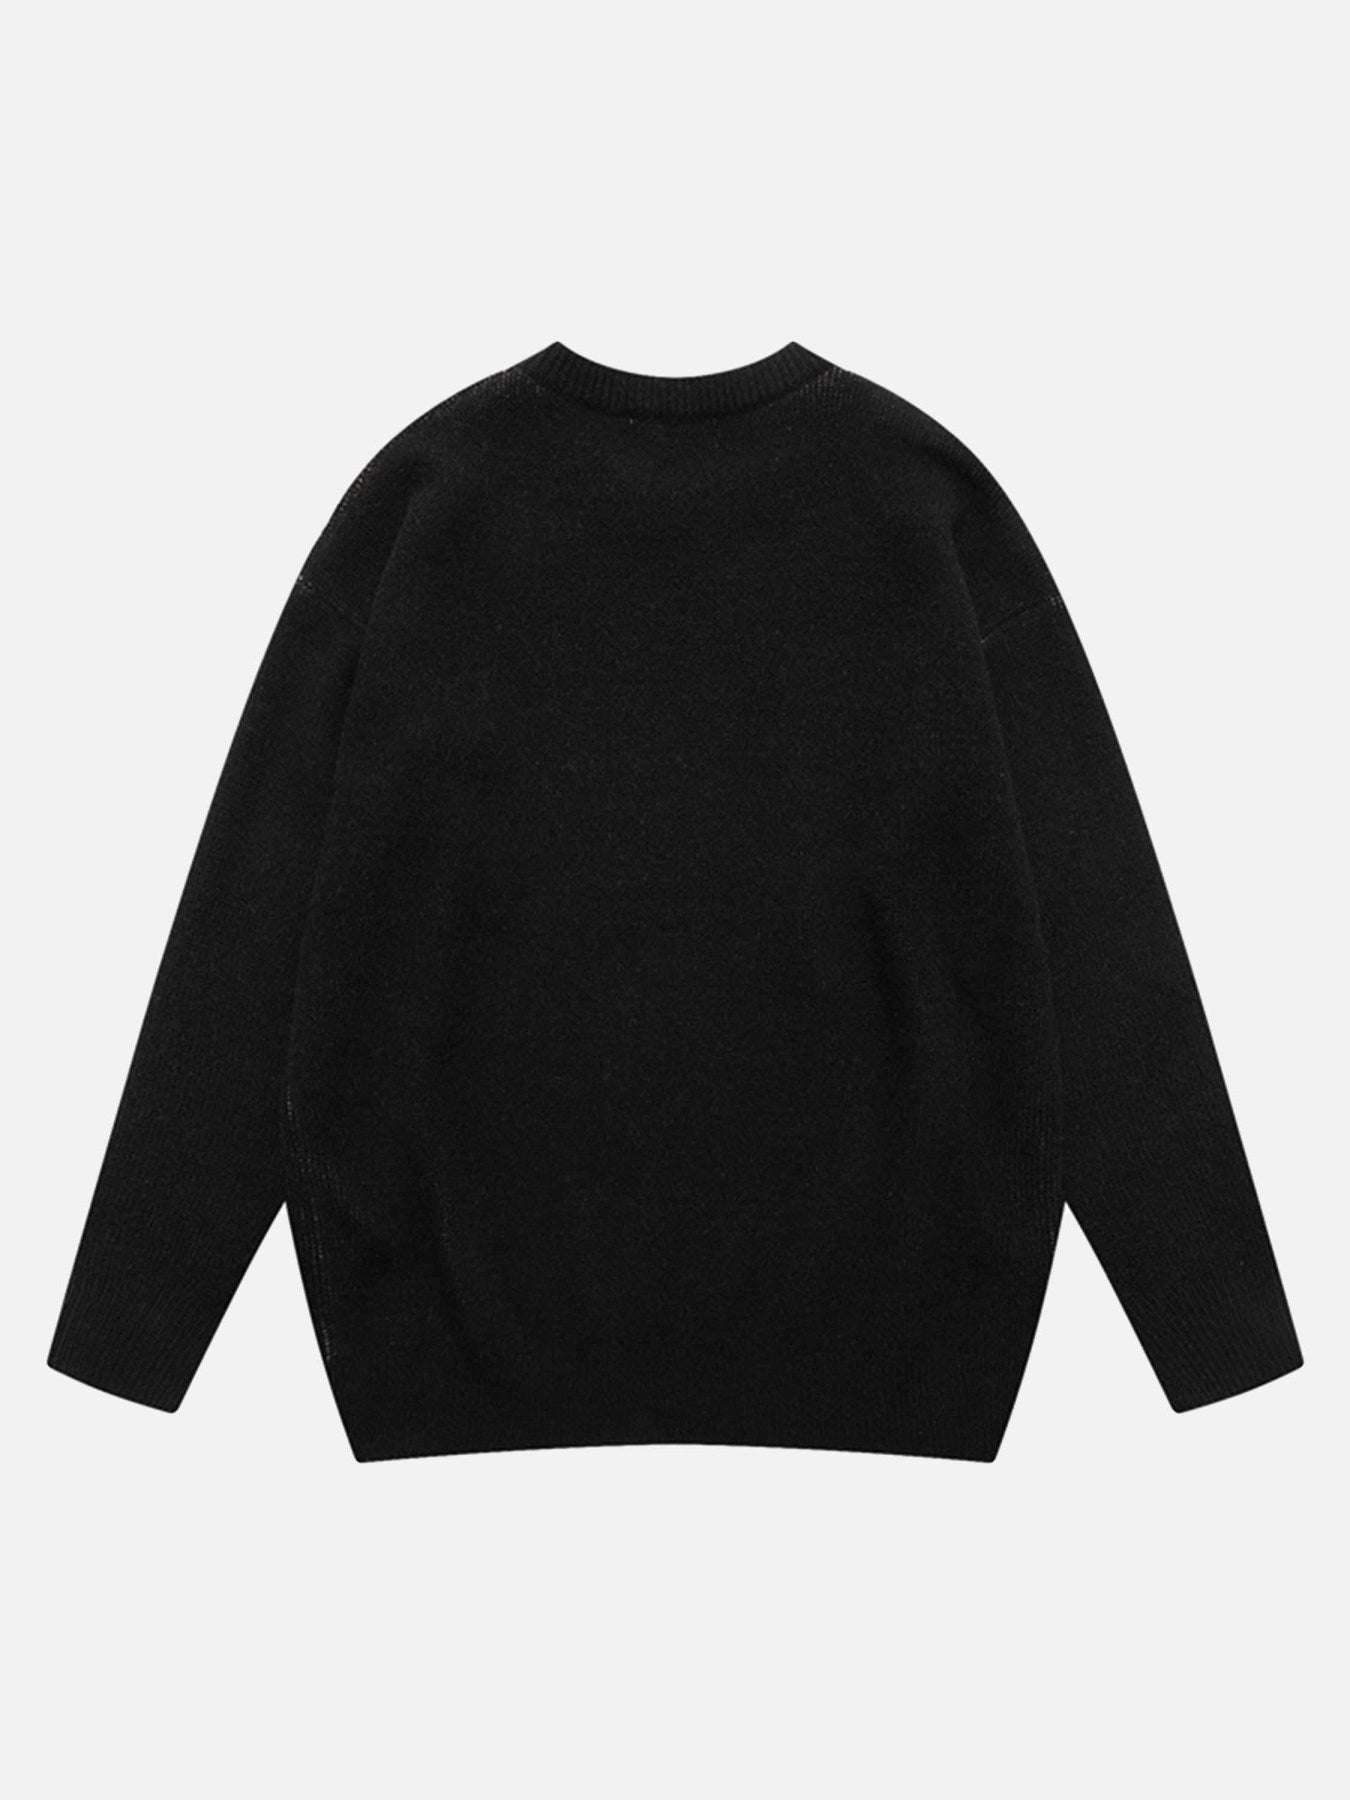 The Supermade Street Vintage Character Knit Sweater